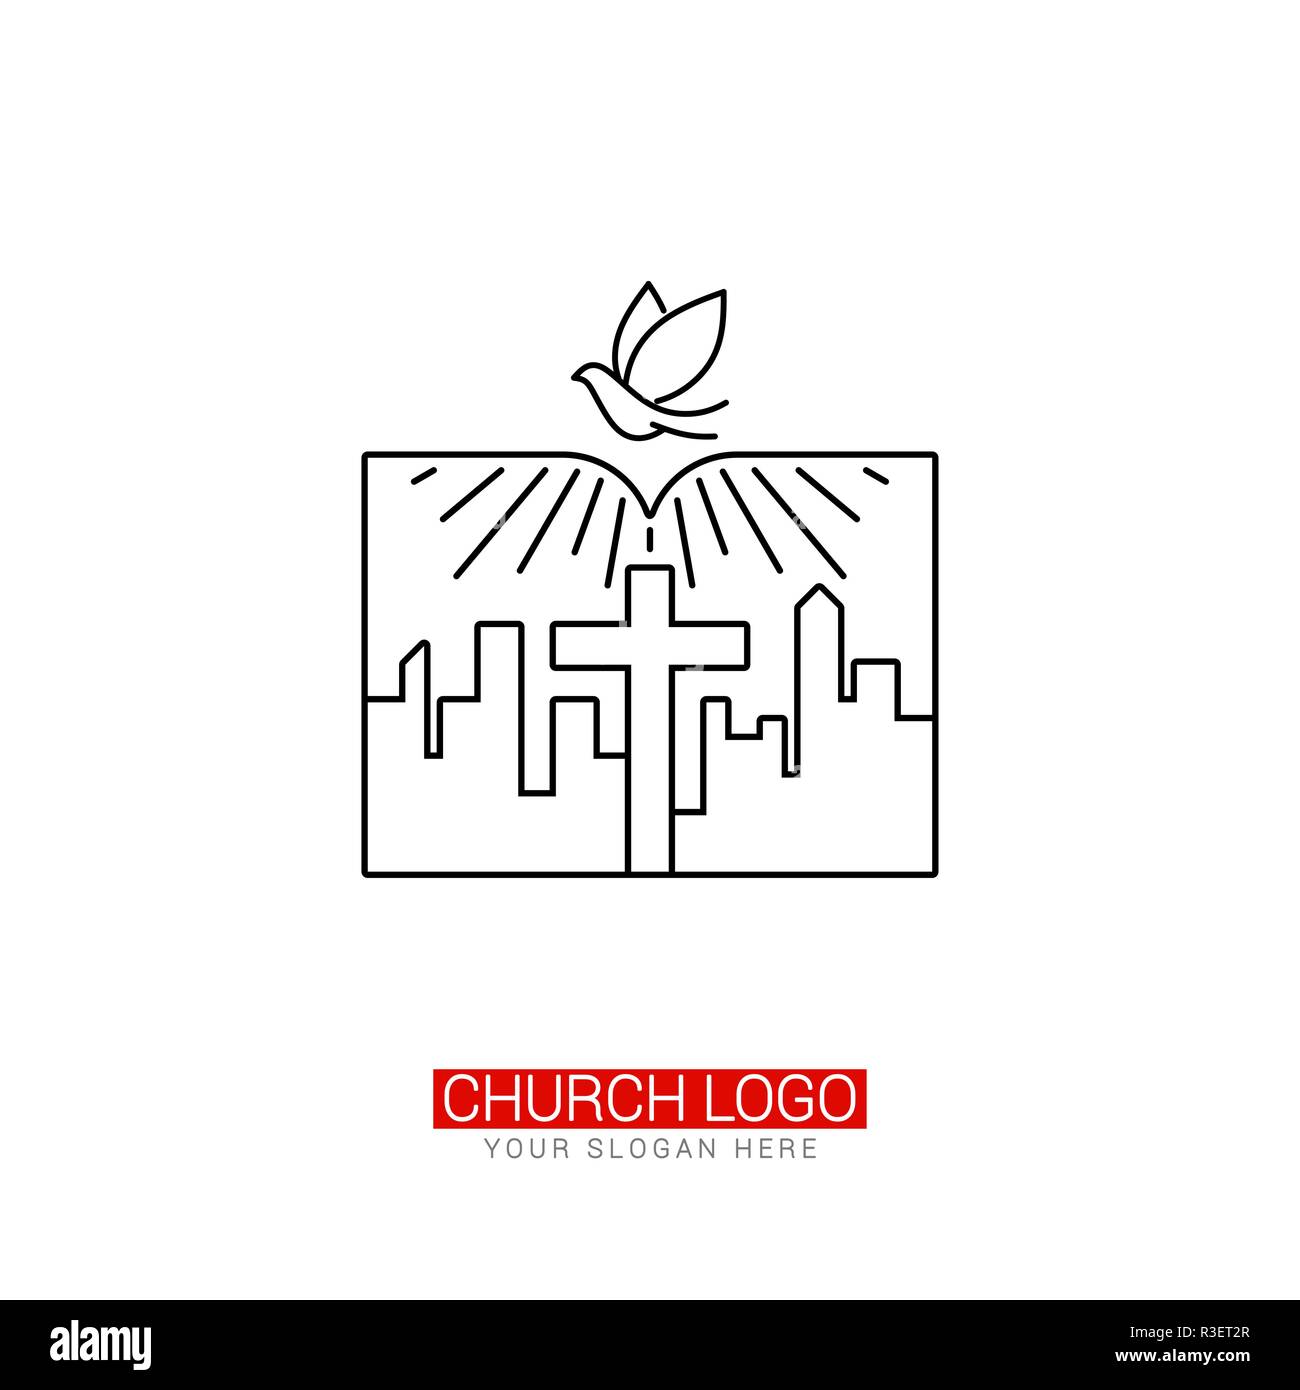 Church logo. Christian symbols. The open Bible, the cross of Jesus and the city. Stock Vector